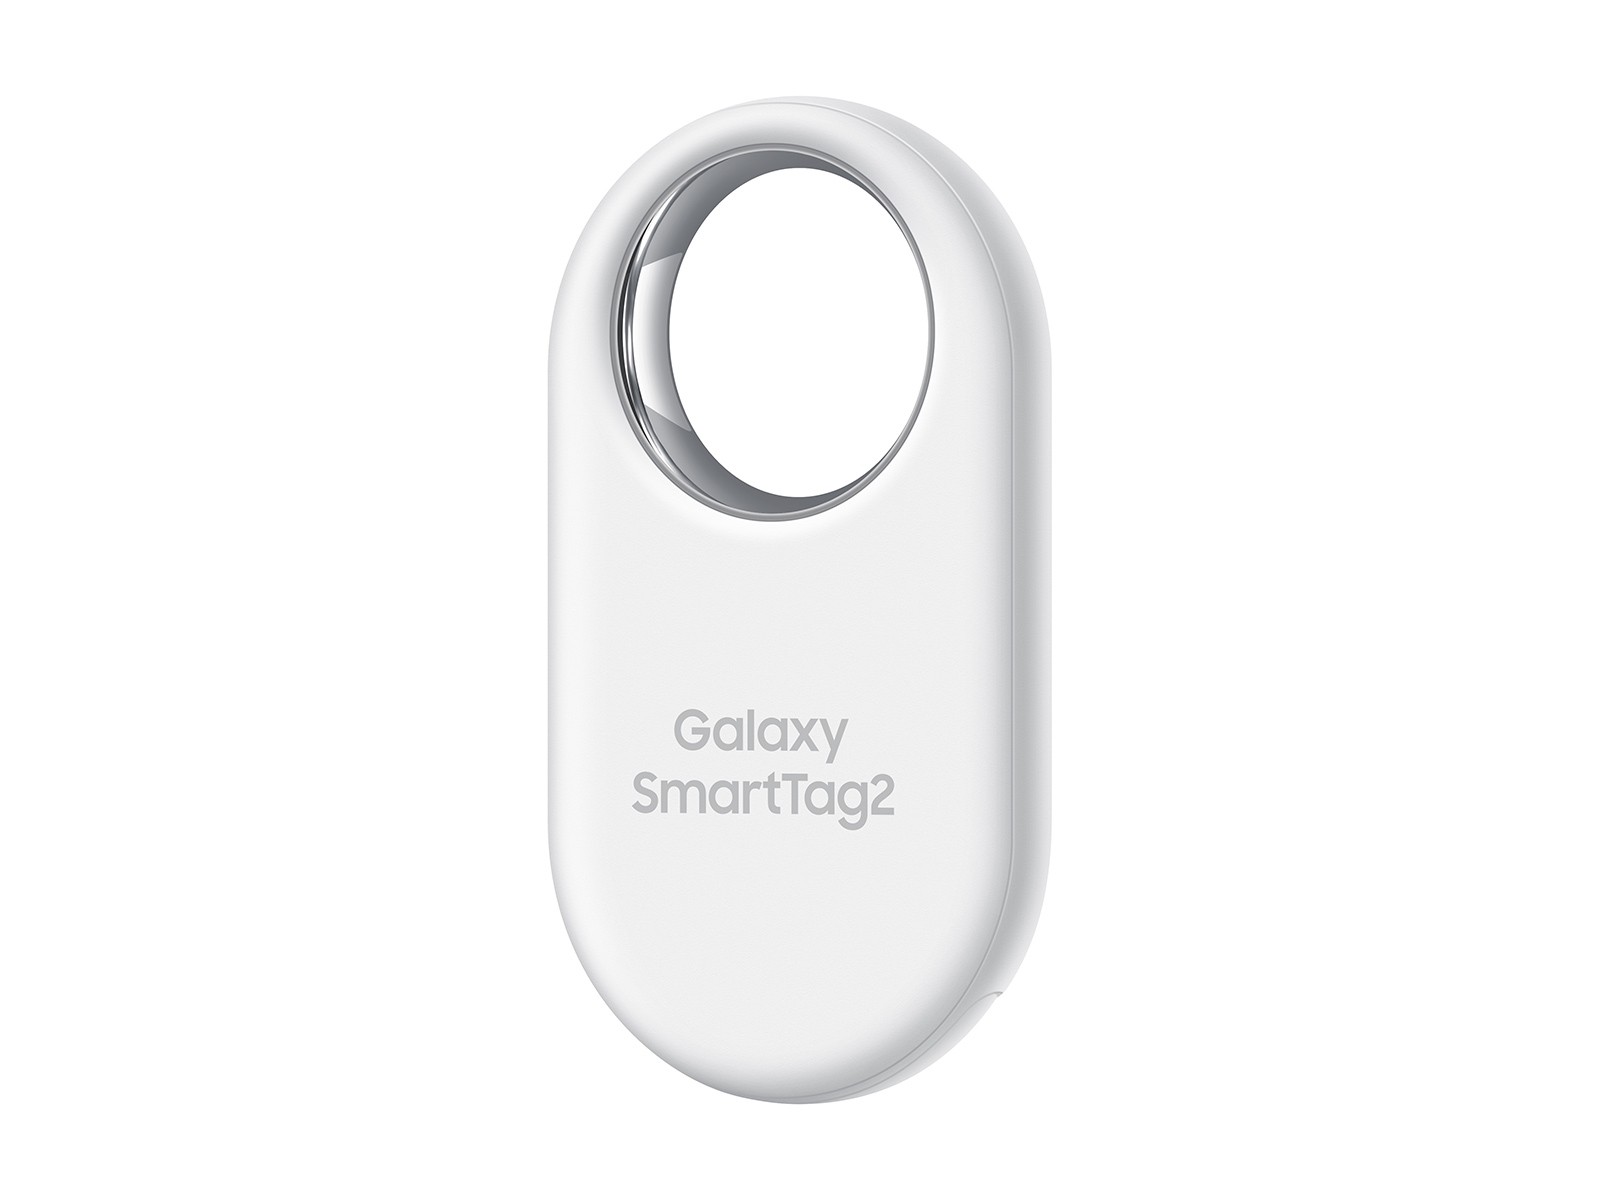 Introducing New Samsung Galaxy SmartTag2: A Smart Way to Keep Track of  Important Things in Your Life - Samsung US Newsroom